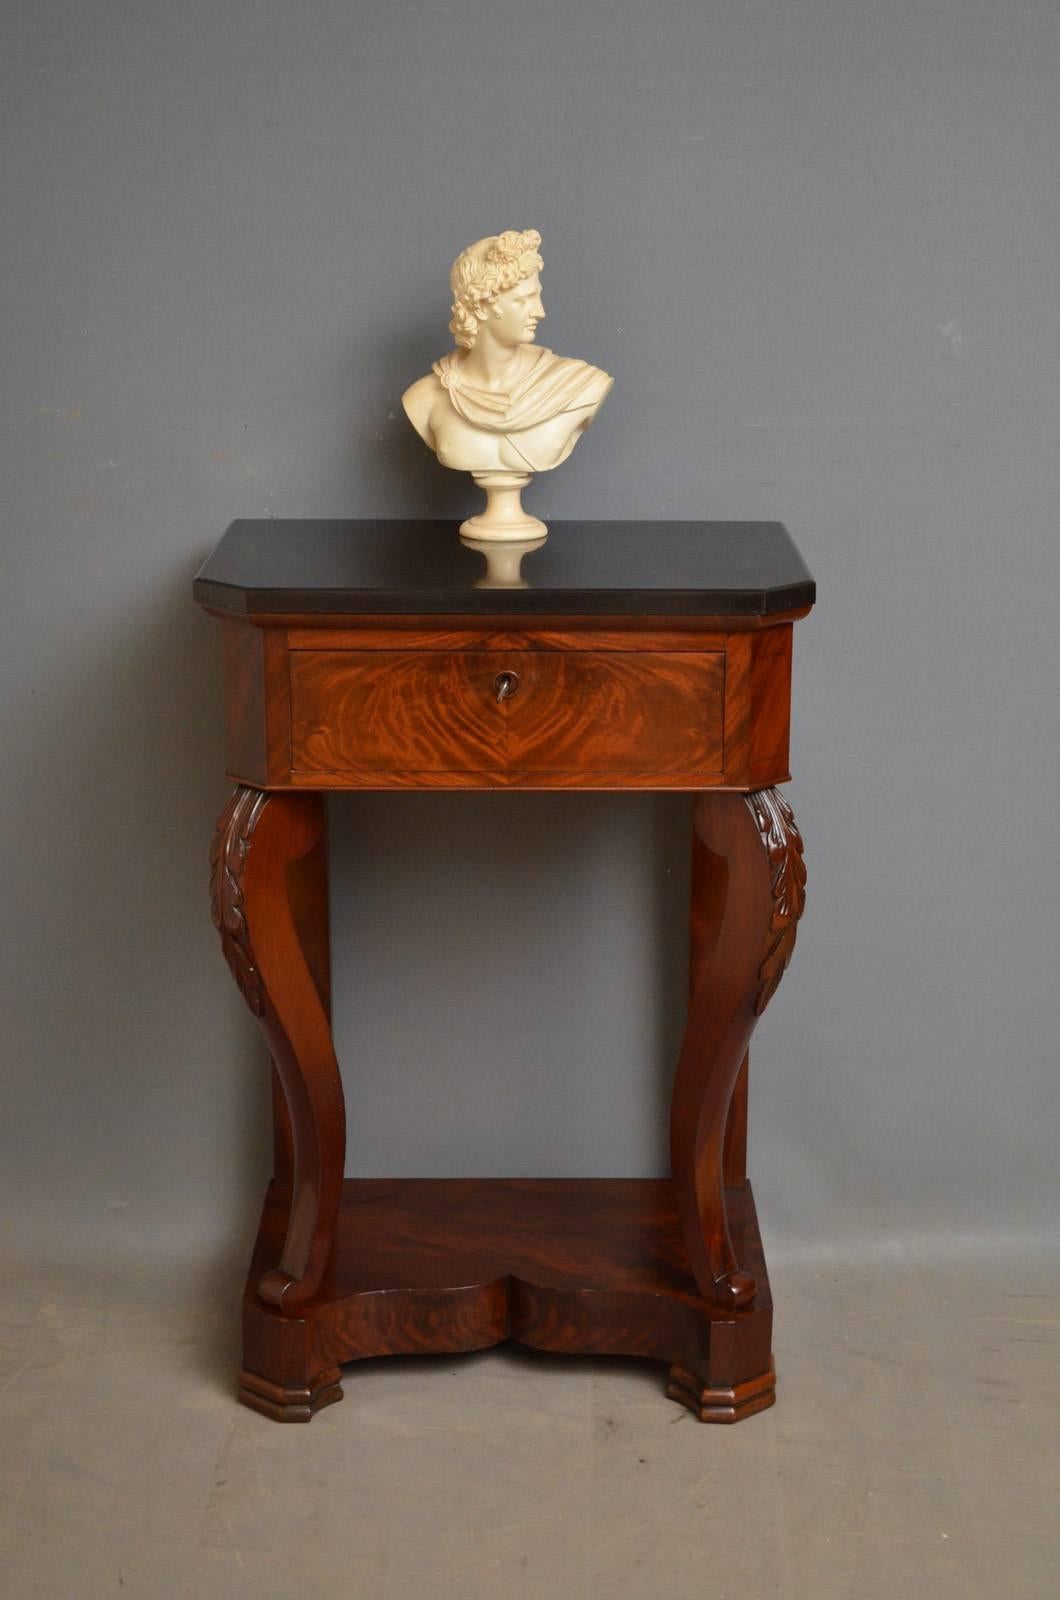 Sn4295, 19th century mahogany hall table of unusually narrow proportions, having original black marble and flamed mahogany, oak lined frieze drawers fitted with original working lock and a key, all standing on carved cabriole legs terminating in